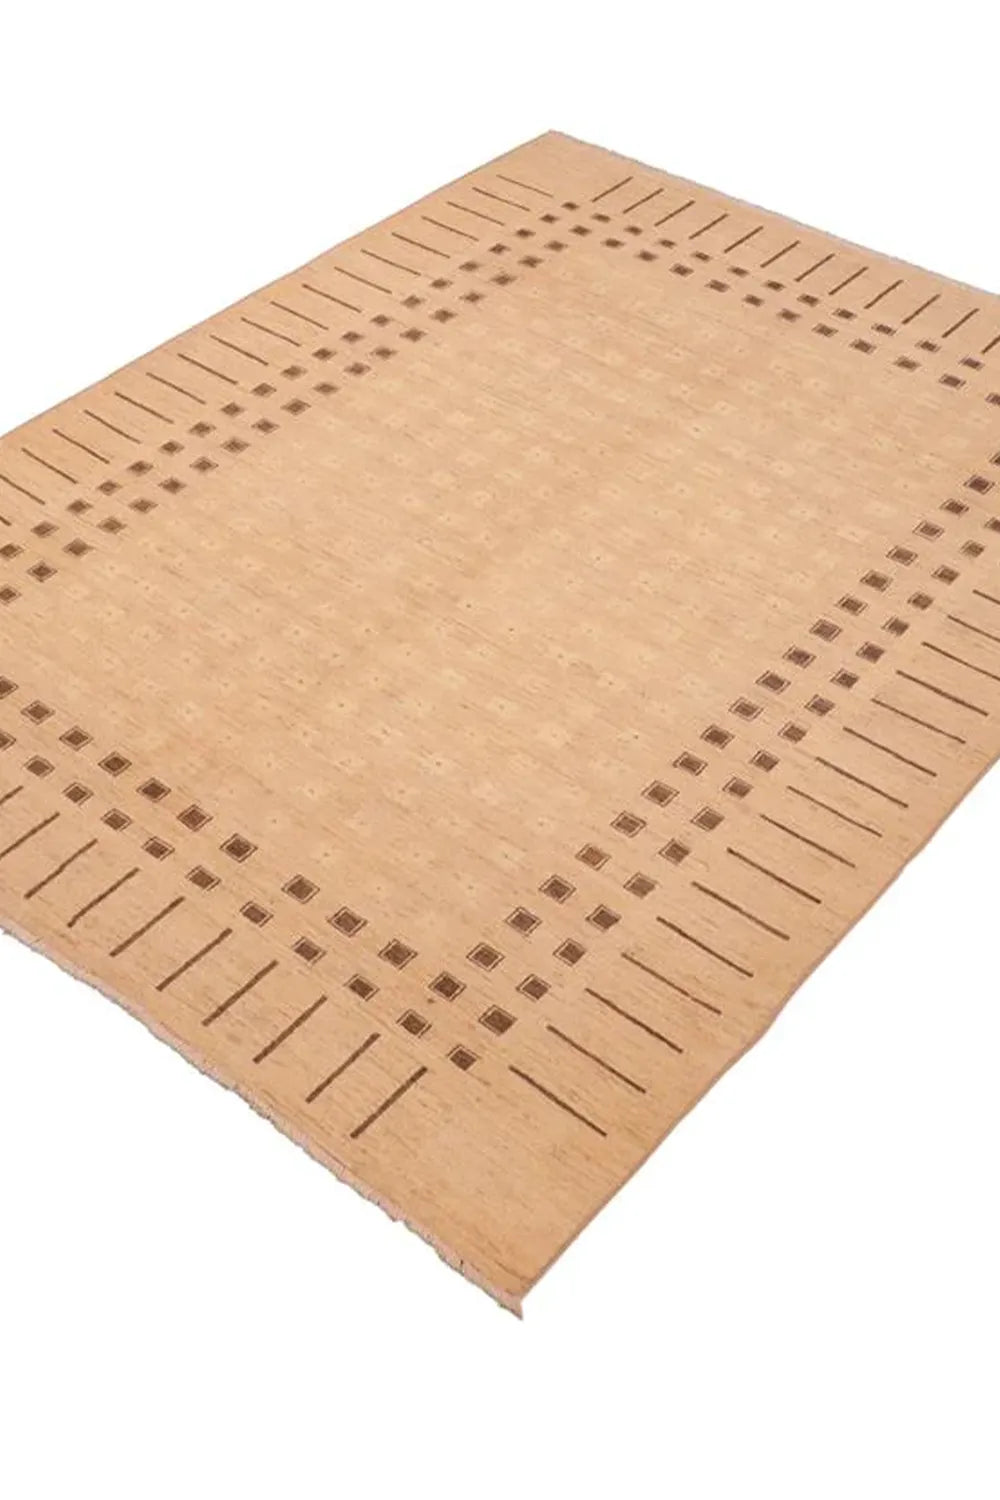 Hand-knotted rug with a neutral geometric pattern, perfect for a tranquil space.